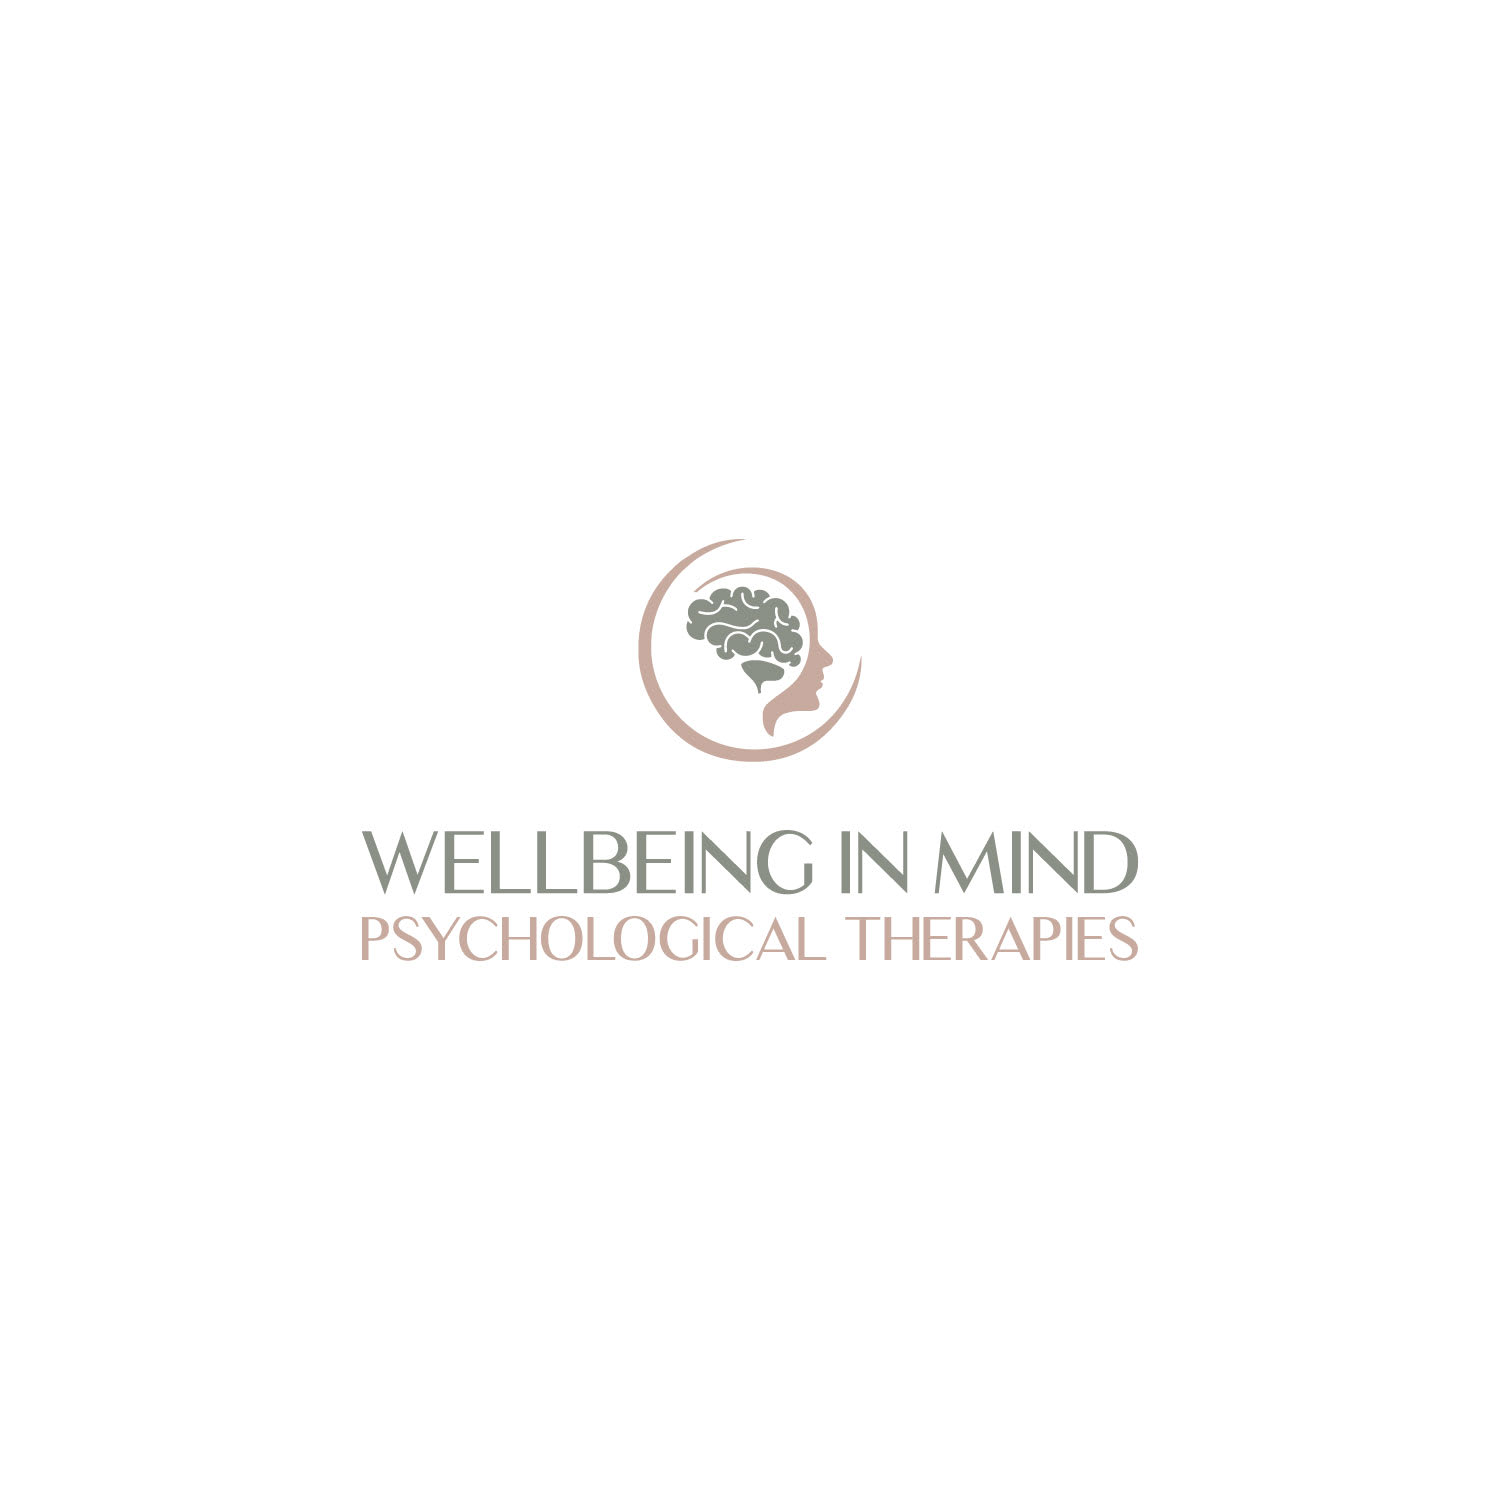 Wellbeing in Mind Psychological Therapies